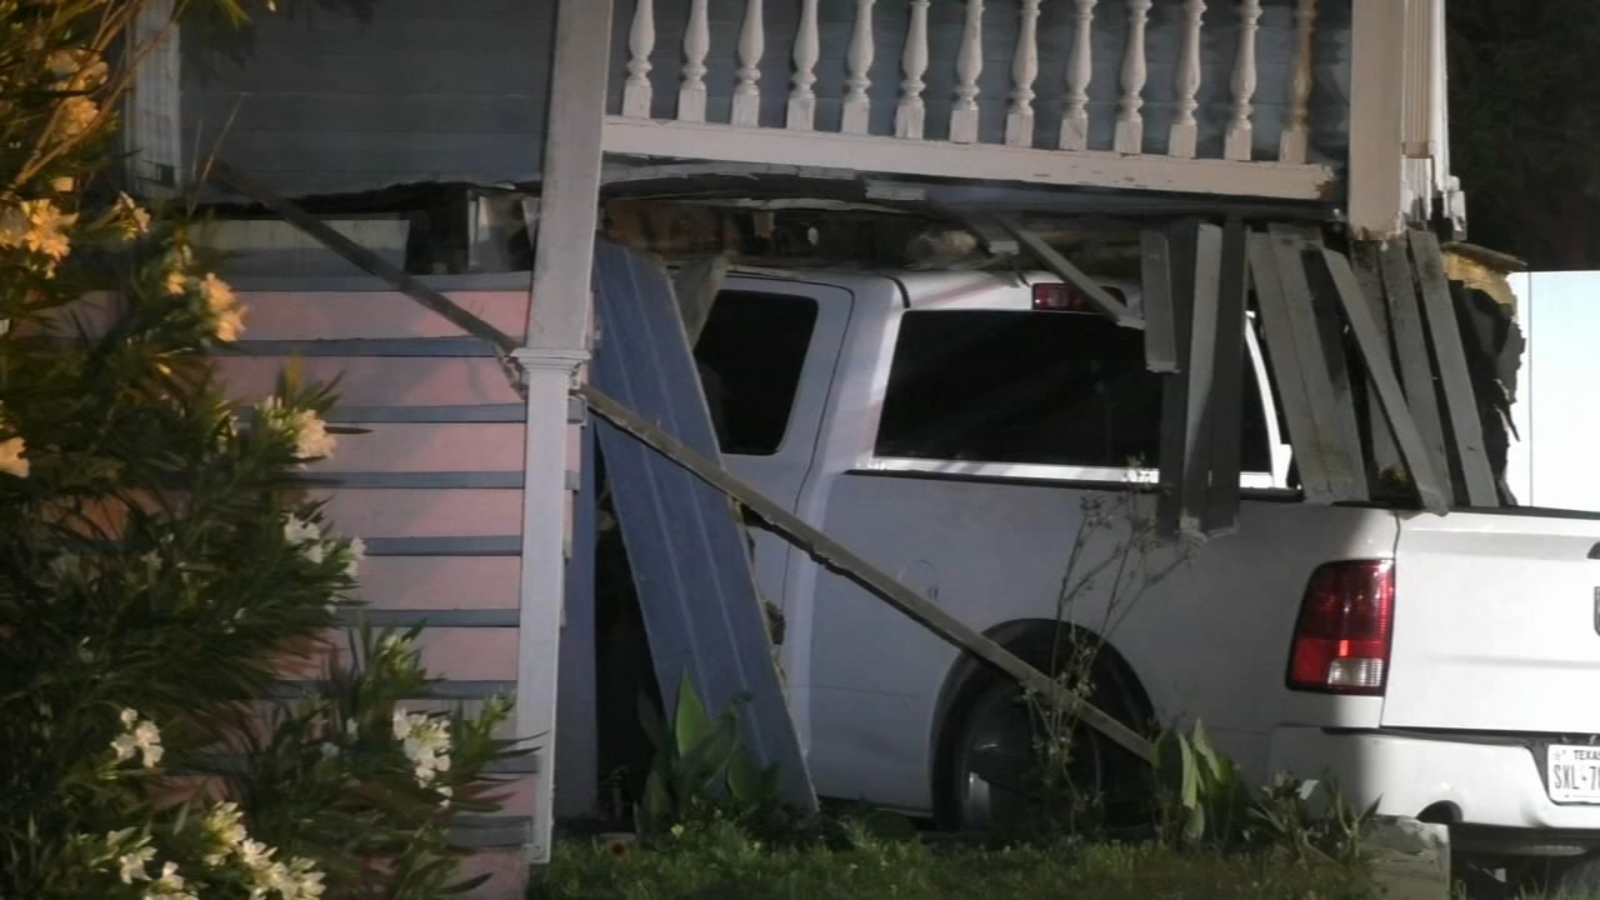 Car into house: Police chase ends in Galveston after driver crashes into vacant home on Winnie Street [Video]